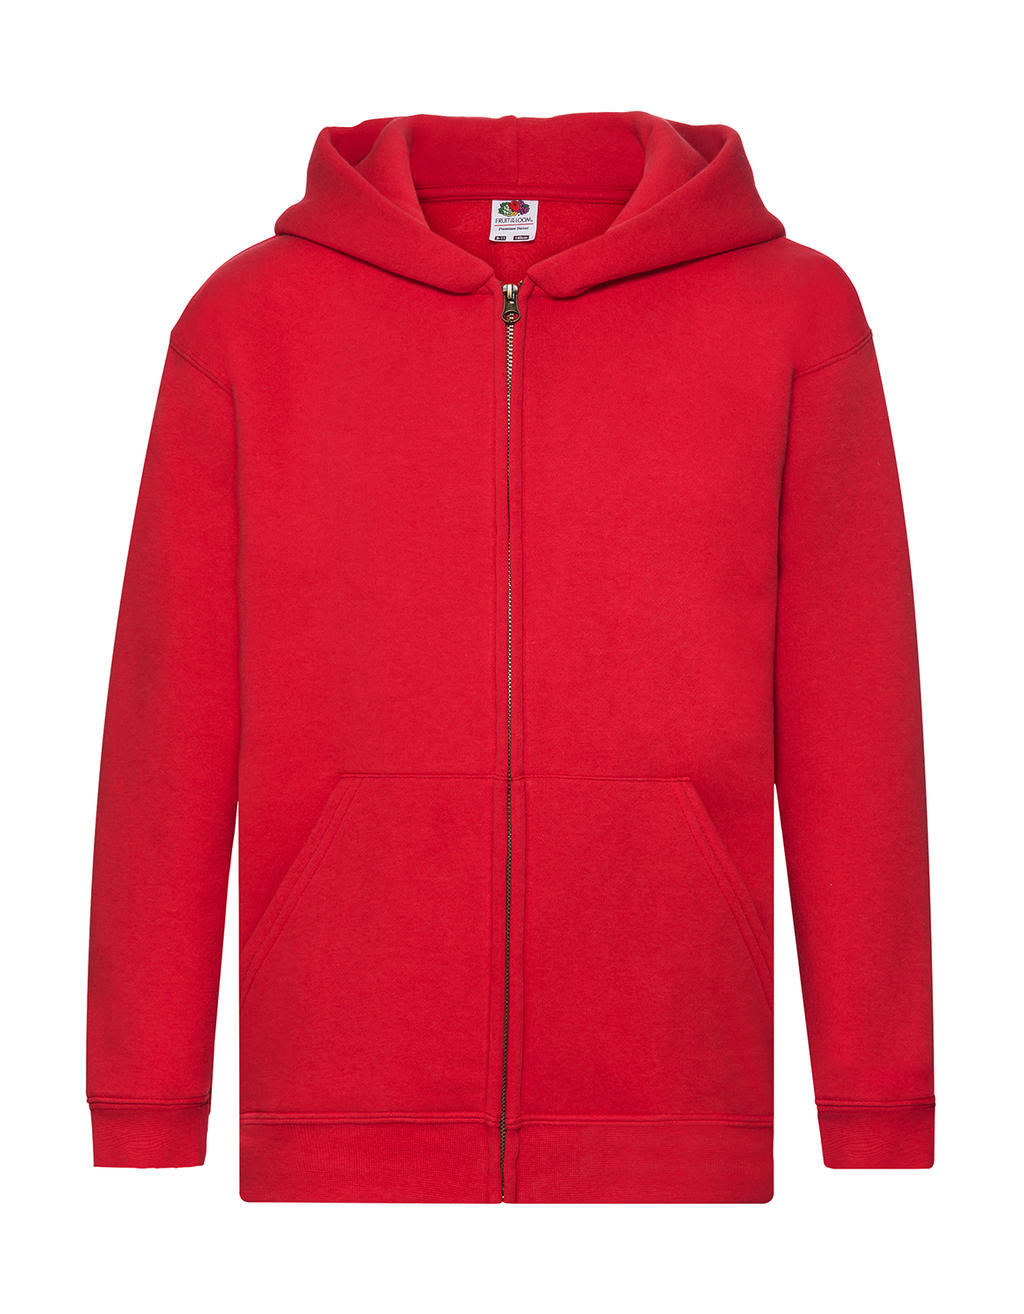  Kids Premium Hooded Sweat Jacket in Farbe Red